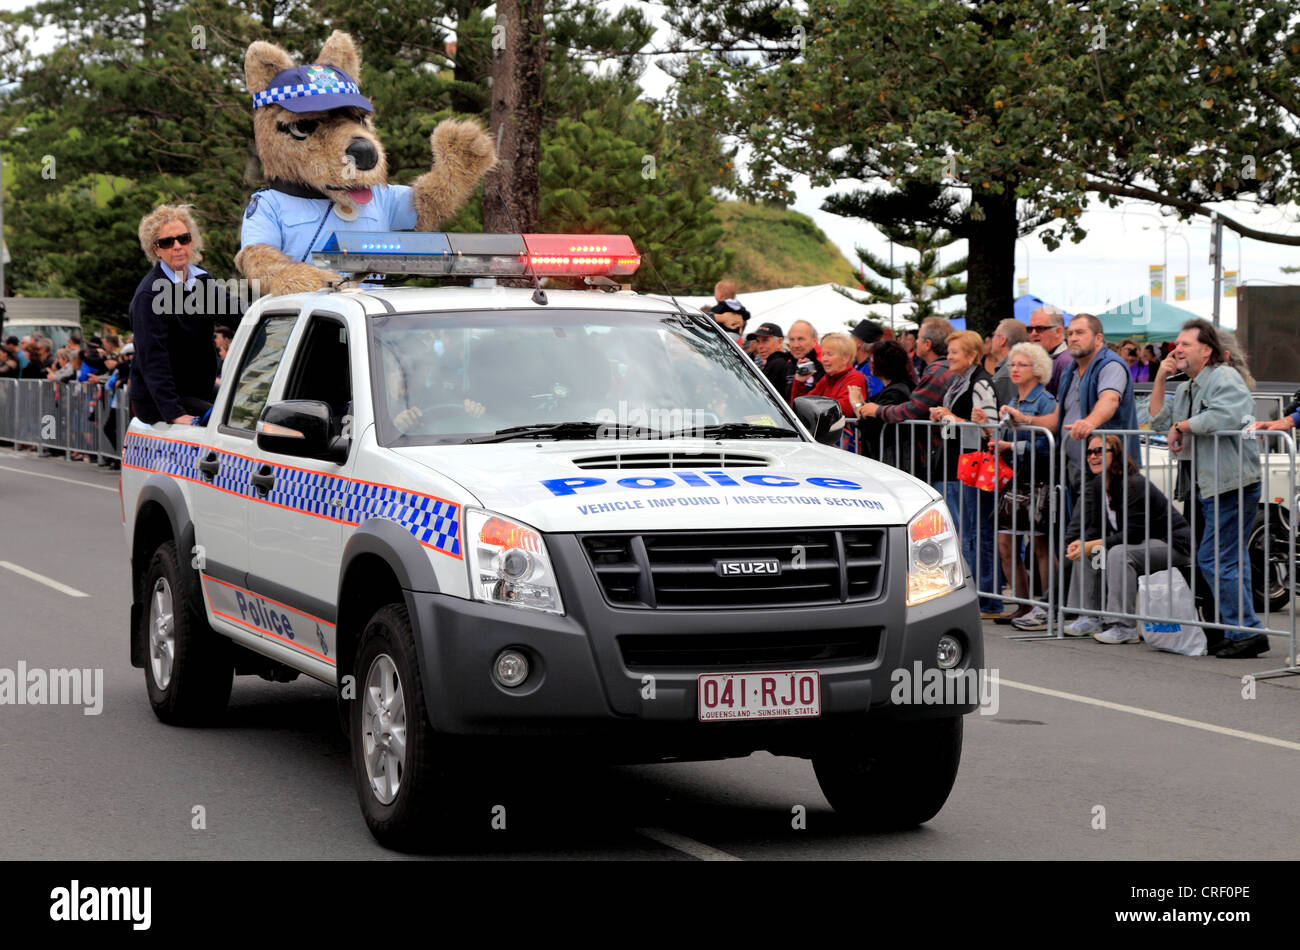 Community policing by Queensland Police at the 'Cooly Rocks On' festival Stock Photo